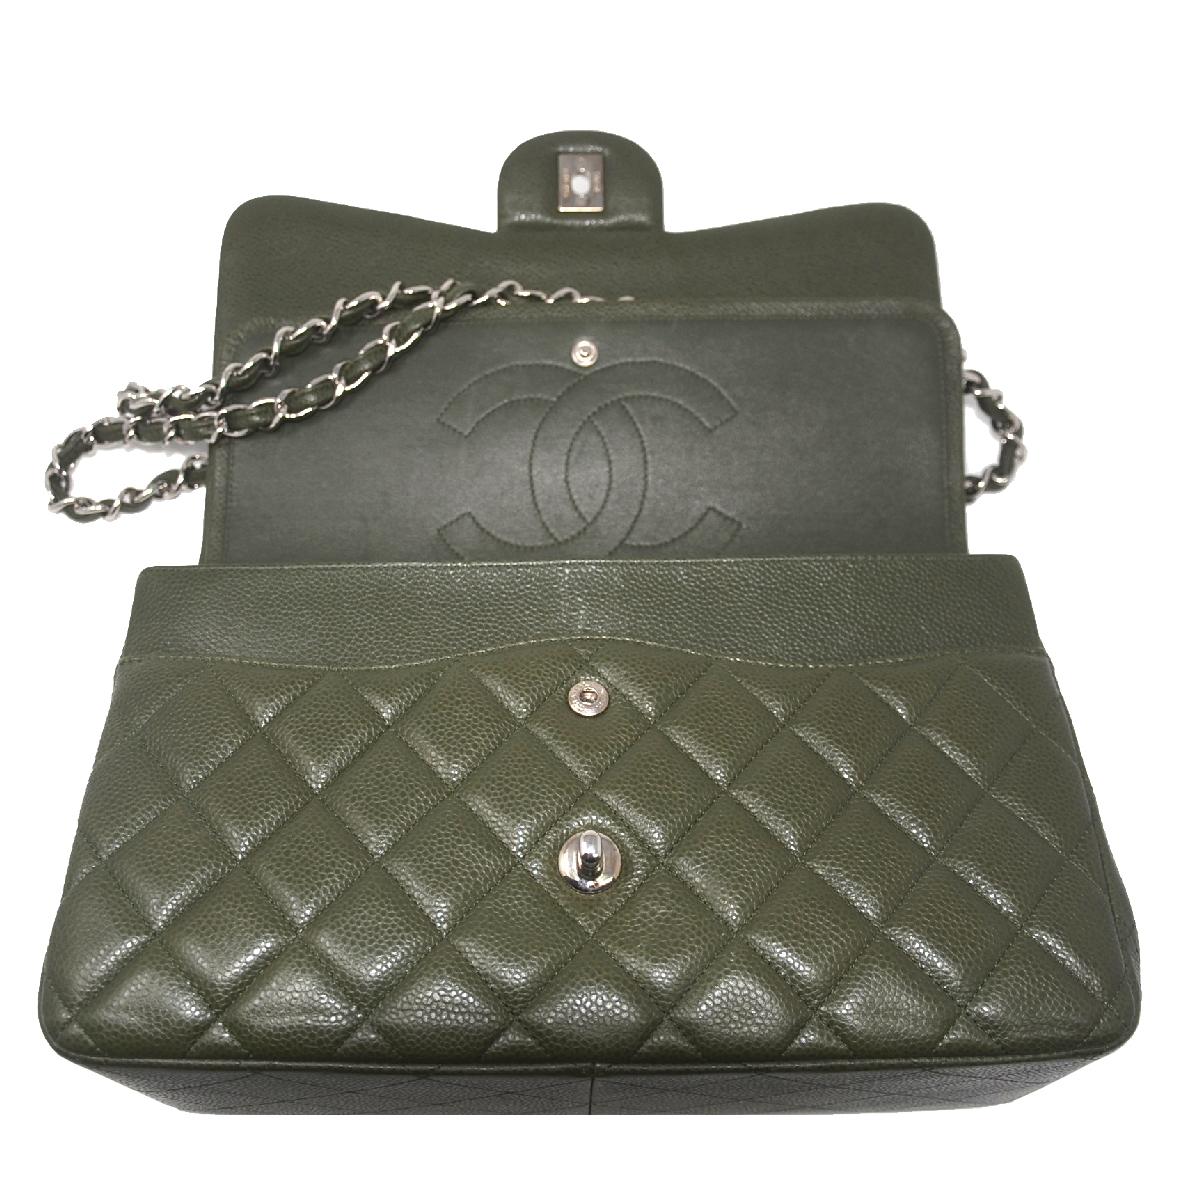  Chanel Olive Green Jumbo Double Flap Shoulder Bag With Card   3